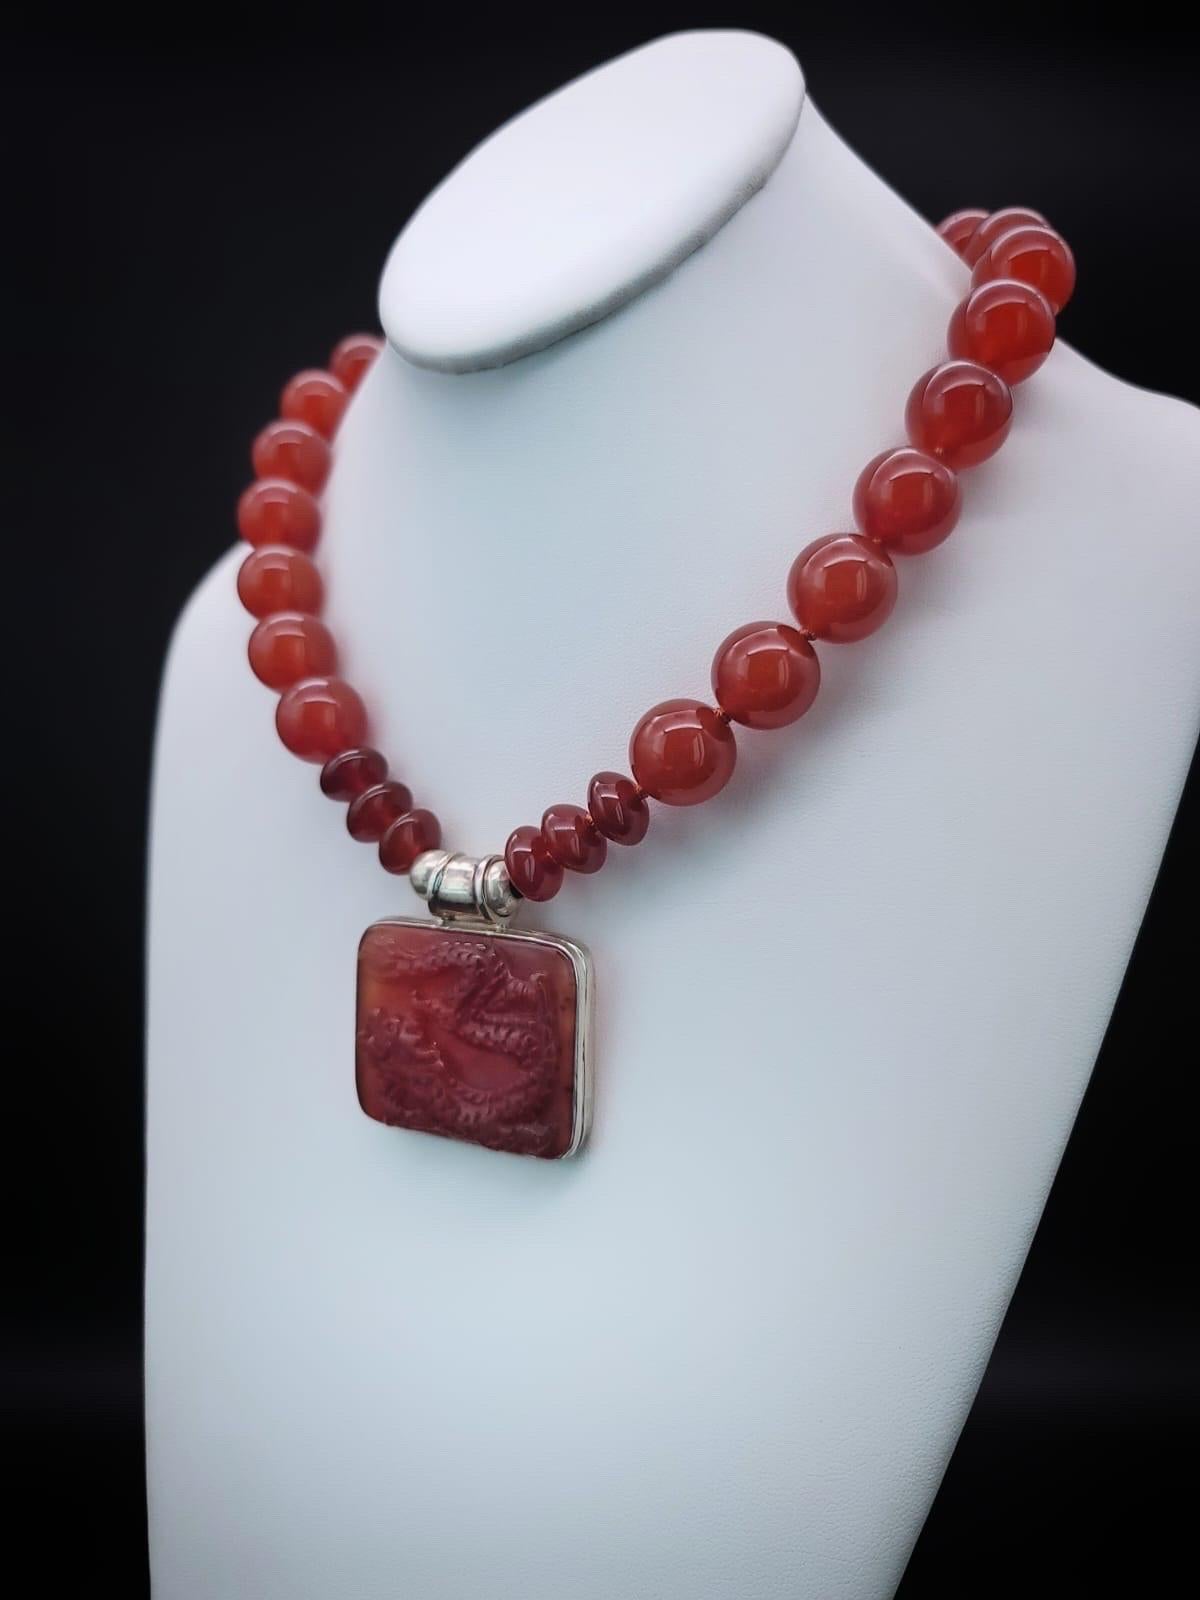 One-of-a-Kind

Richly colored 18m.m. Carnelian gemstone necklace. The red Carnelian pendant suspended from the necklace is a 2”x11/2 Carnelian Dragon richly carved into the stone. The dragon symbol of the emperor in China is particularly powerful